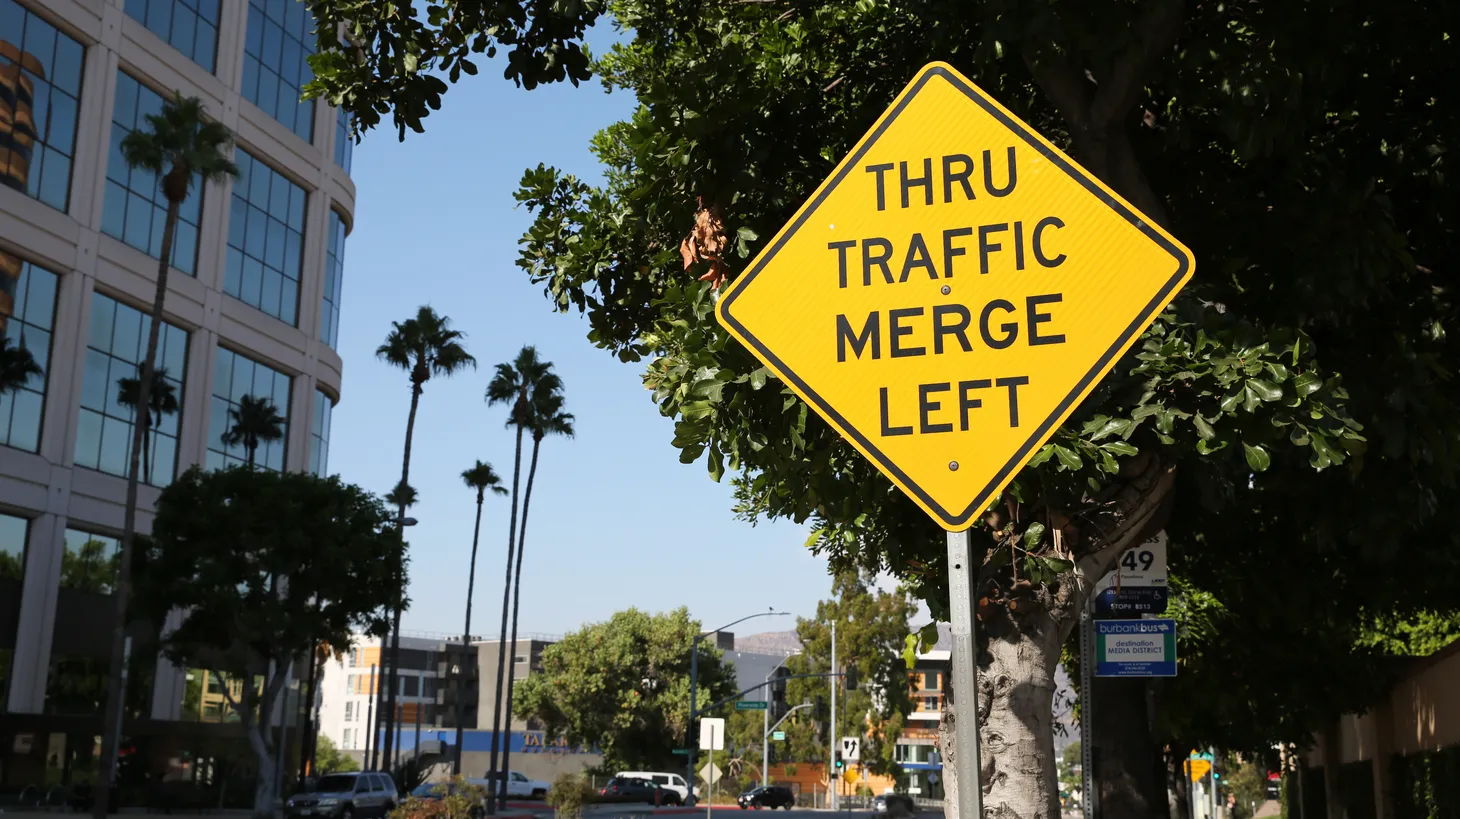 A sign in Burbank says, “Thru traffic merge left.” Studies have shown that zipper merging helps traffic flow better, but California transit officials don’t plan to adopt it as an official rule yet.